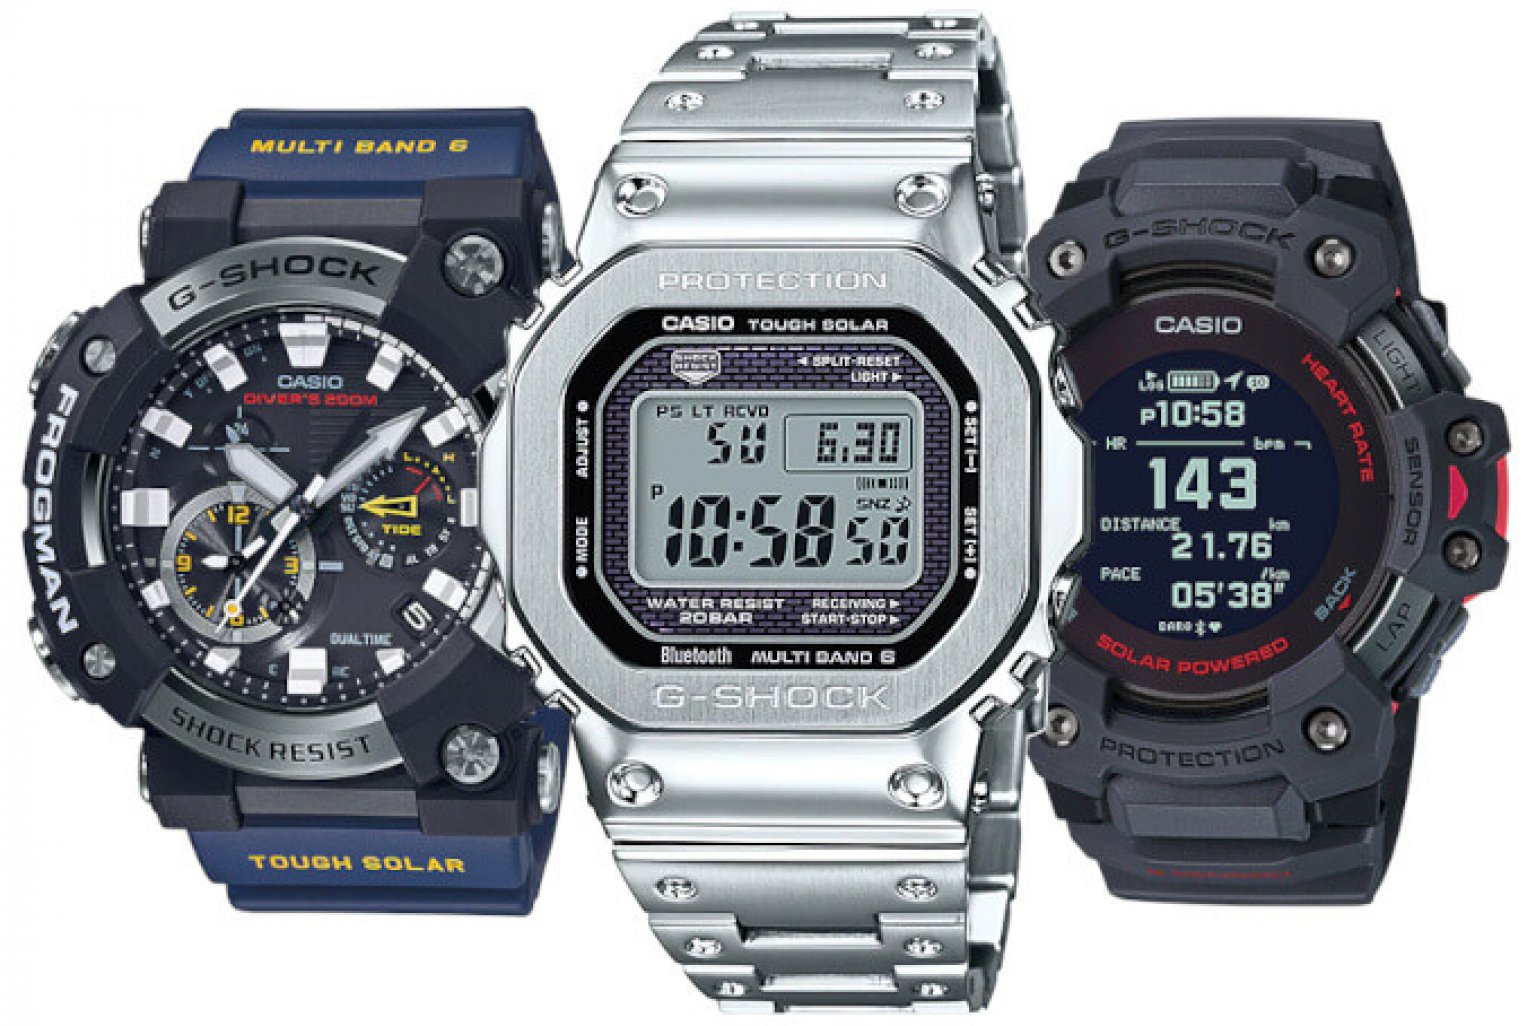 The 20 Best Casio GShock Watches by GCentral